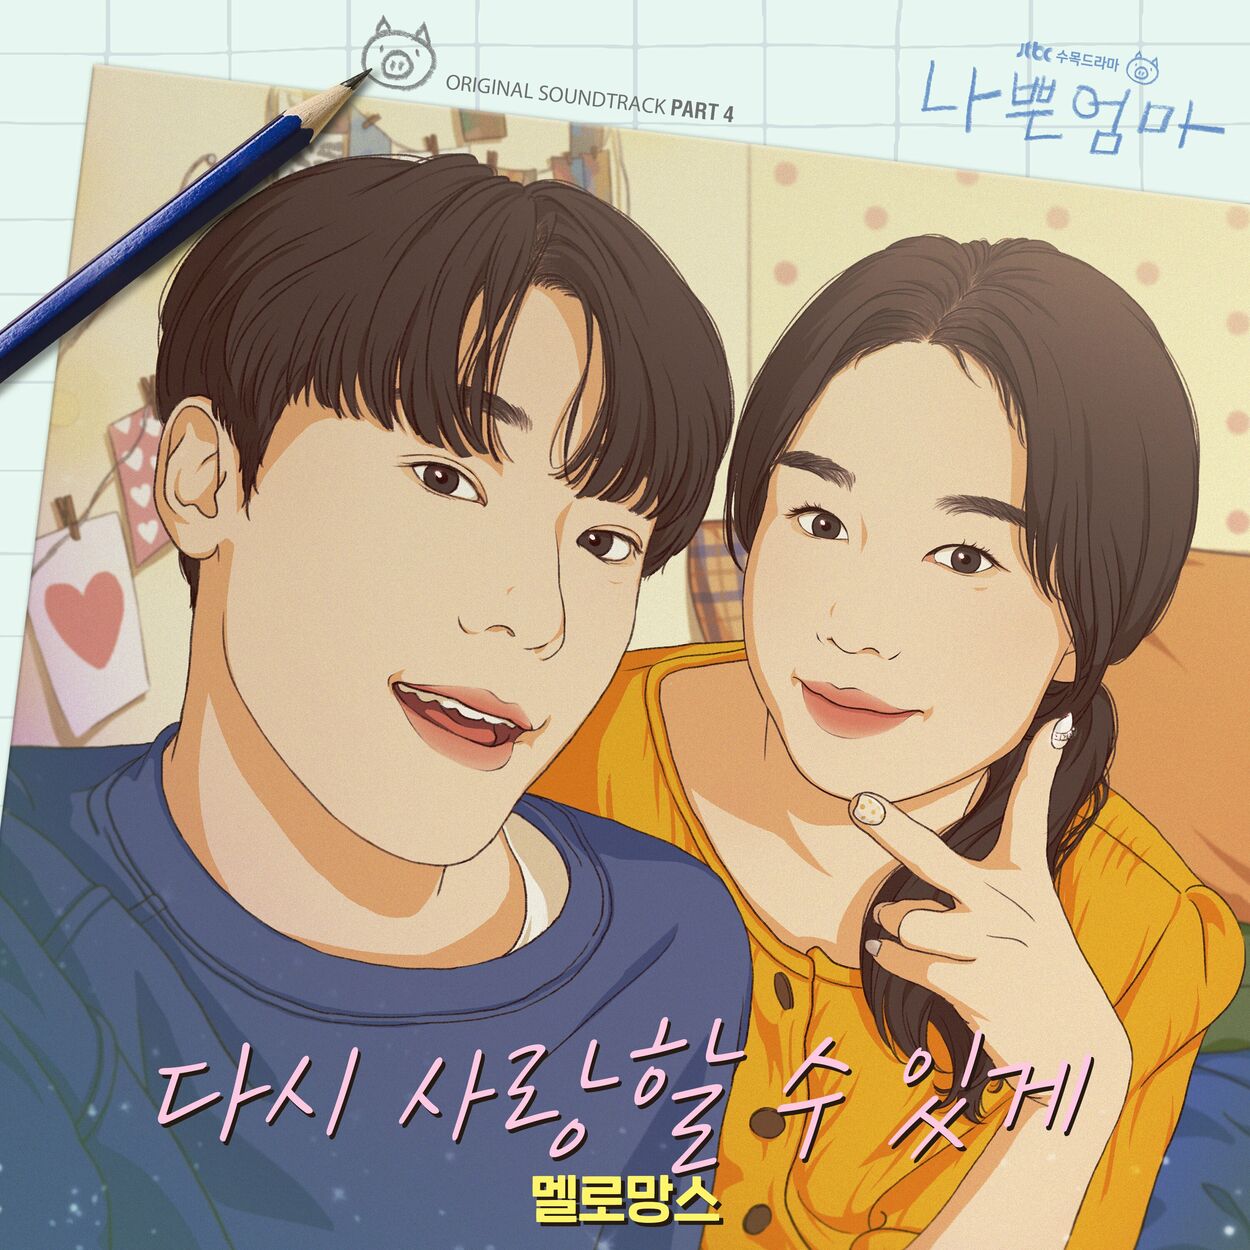 MeloMance – The Good Bad Mother (OST, Pt. 4)